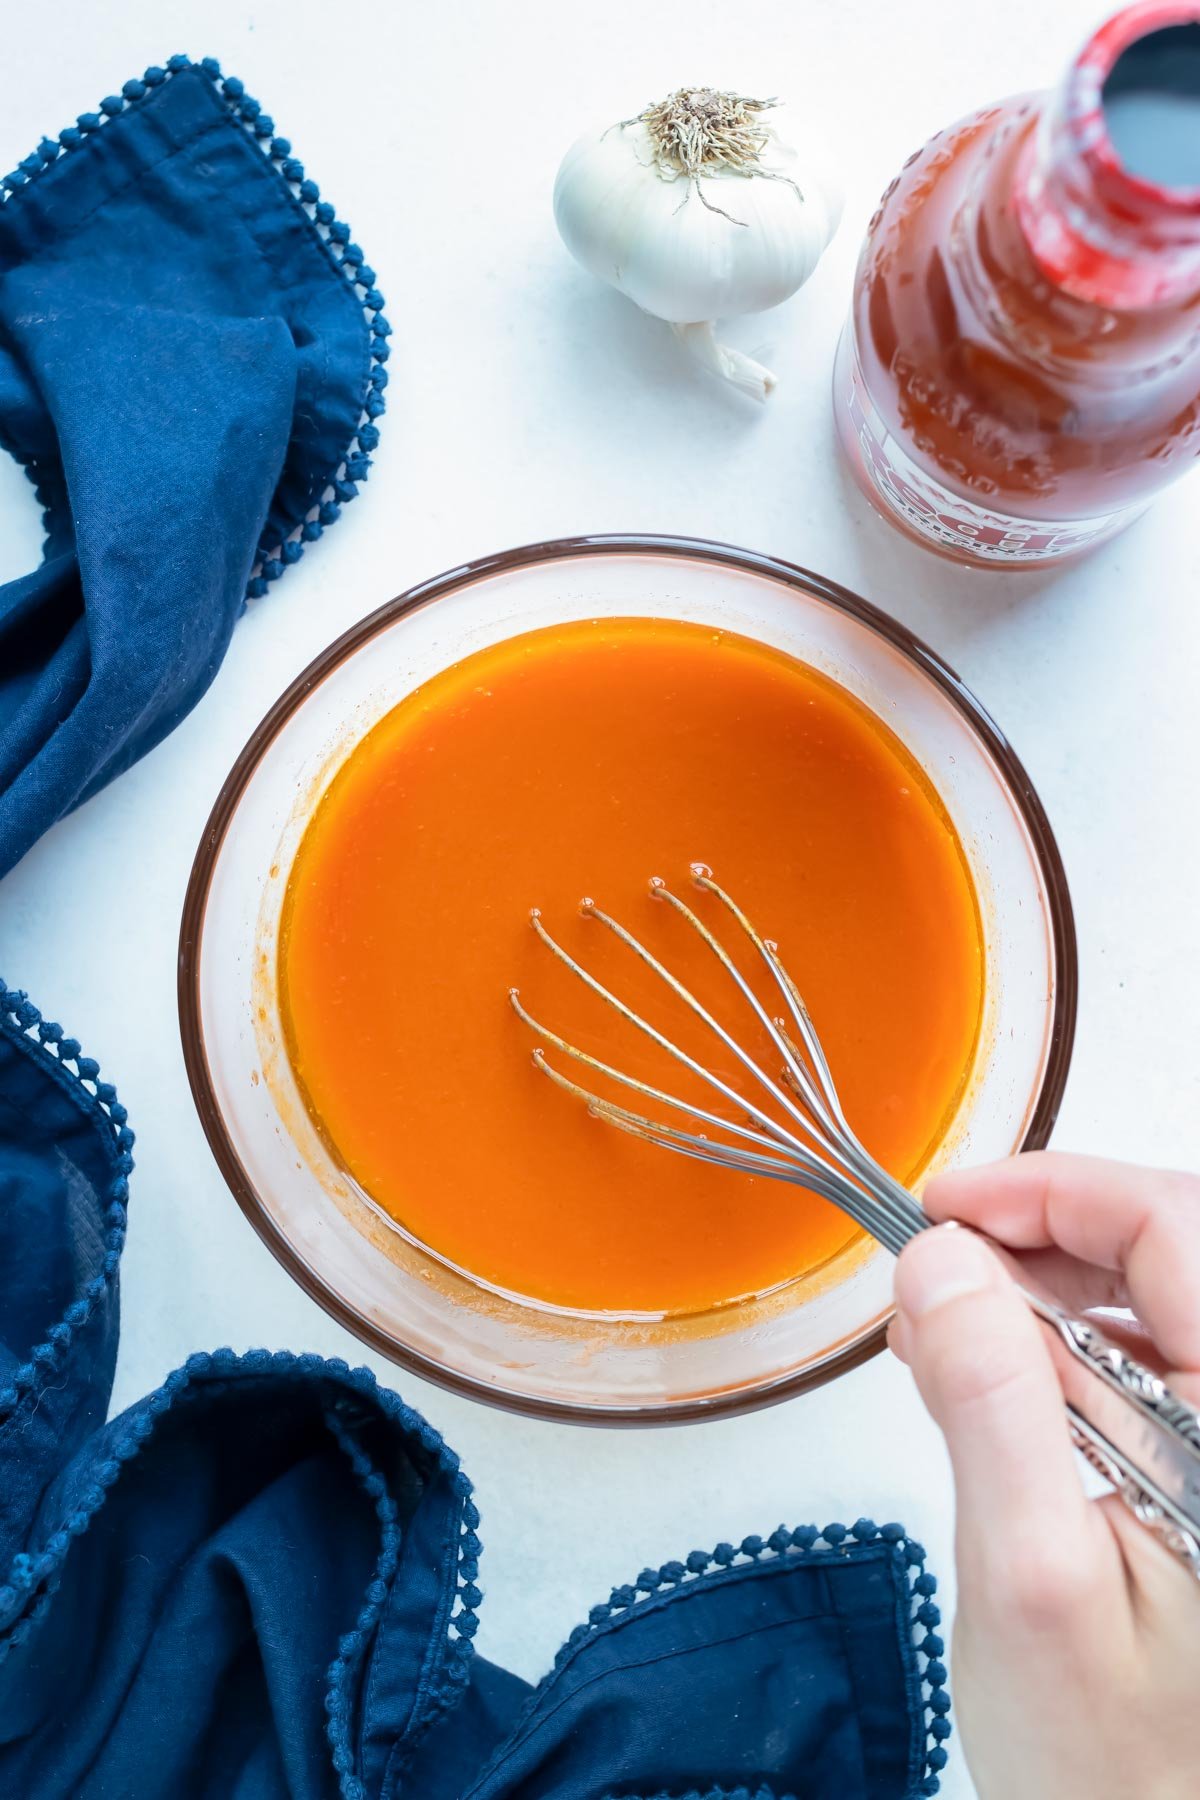 Homemade buffalo sauce is made in a glass bowl in 5 minutes.